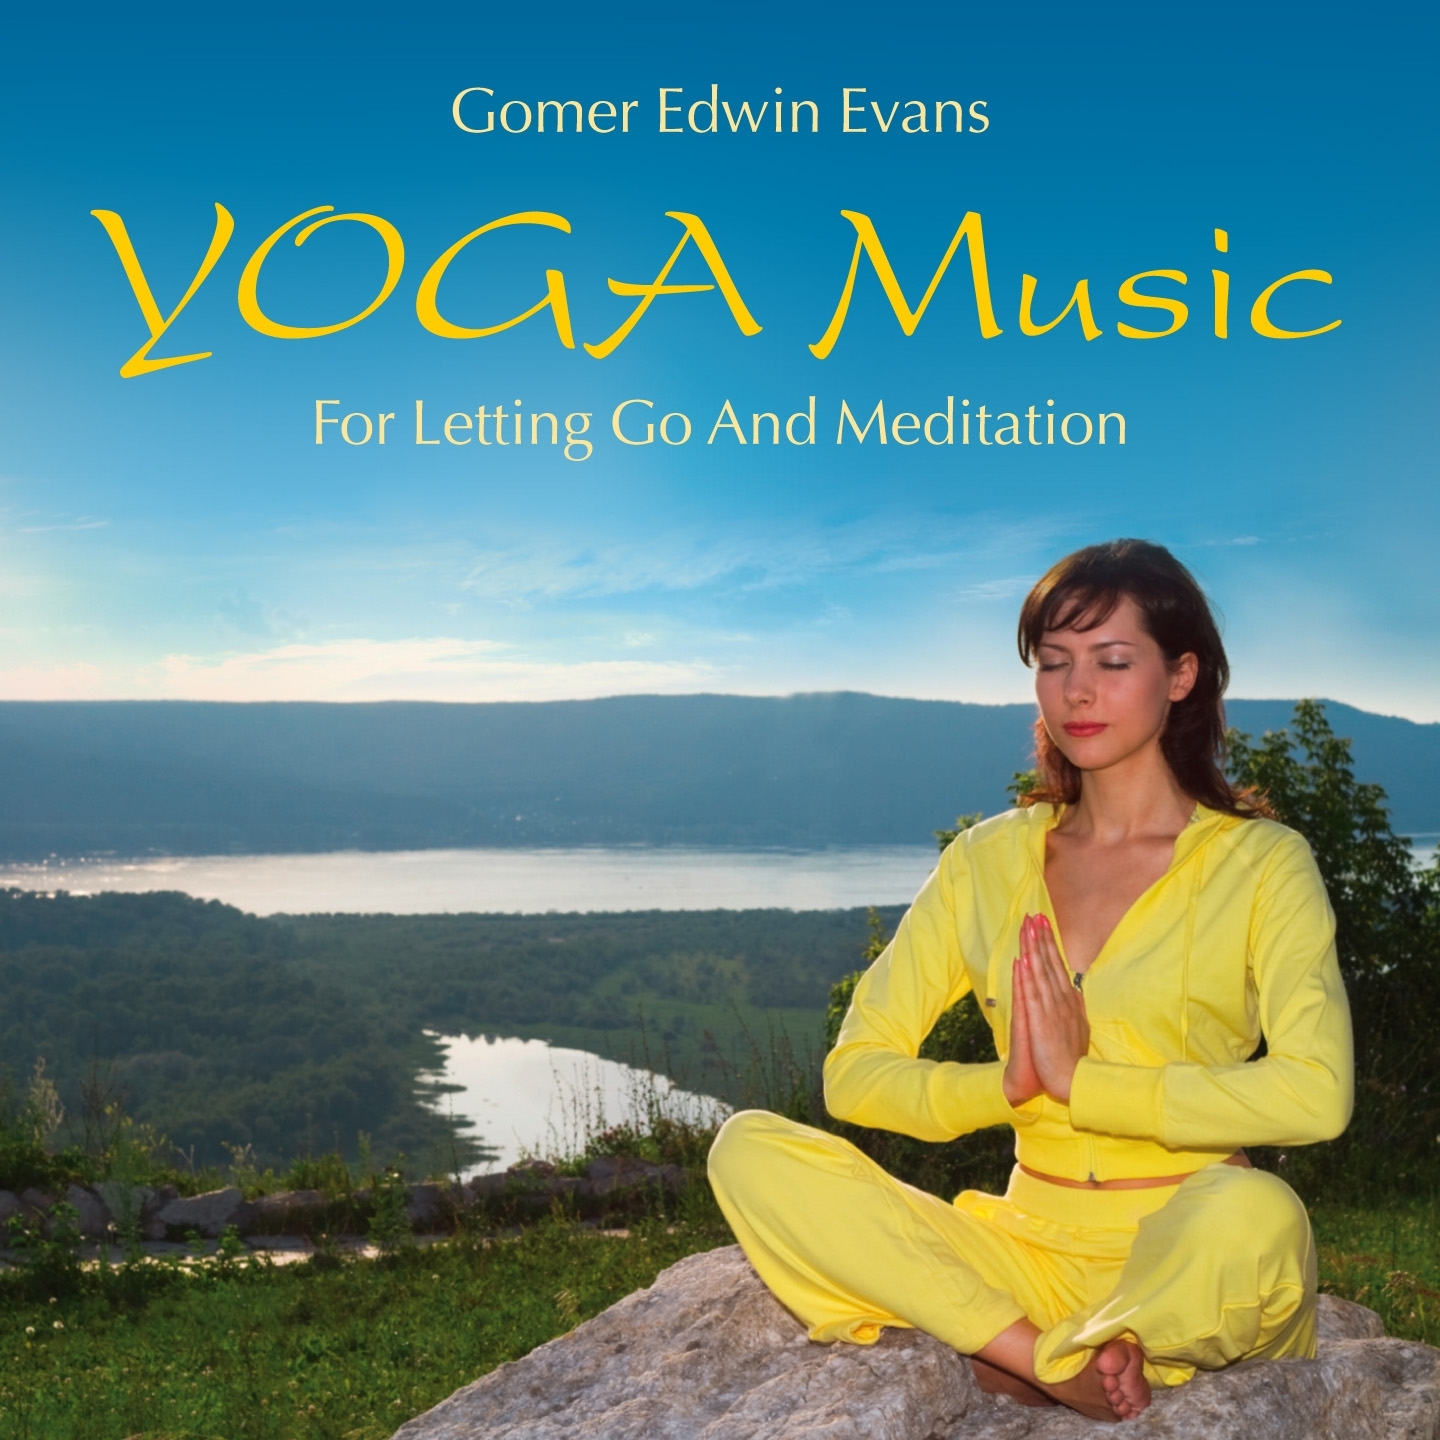 YOGA: Music For Letting Go And Meditation